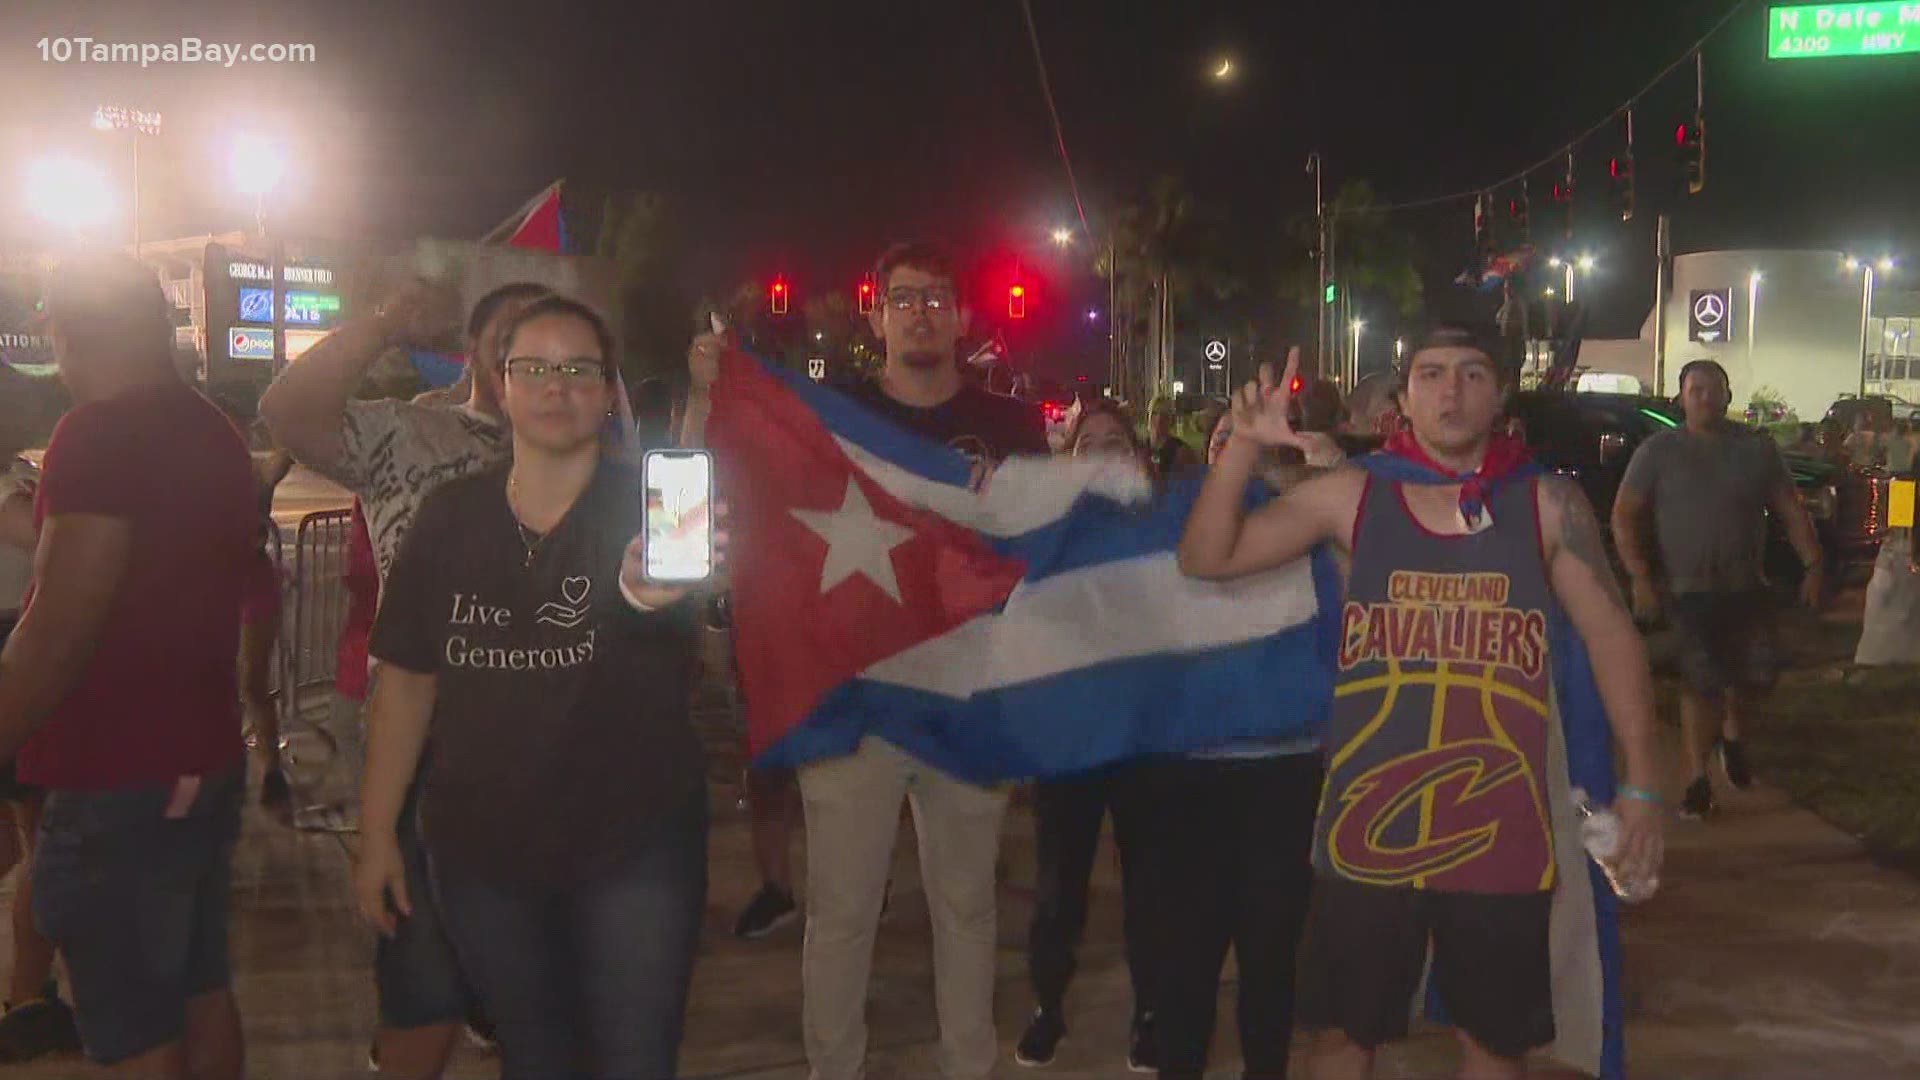 People are calling for change in Cuba amid protests on the island nation.